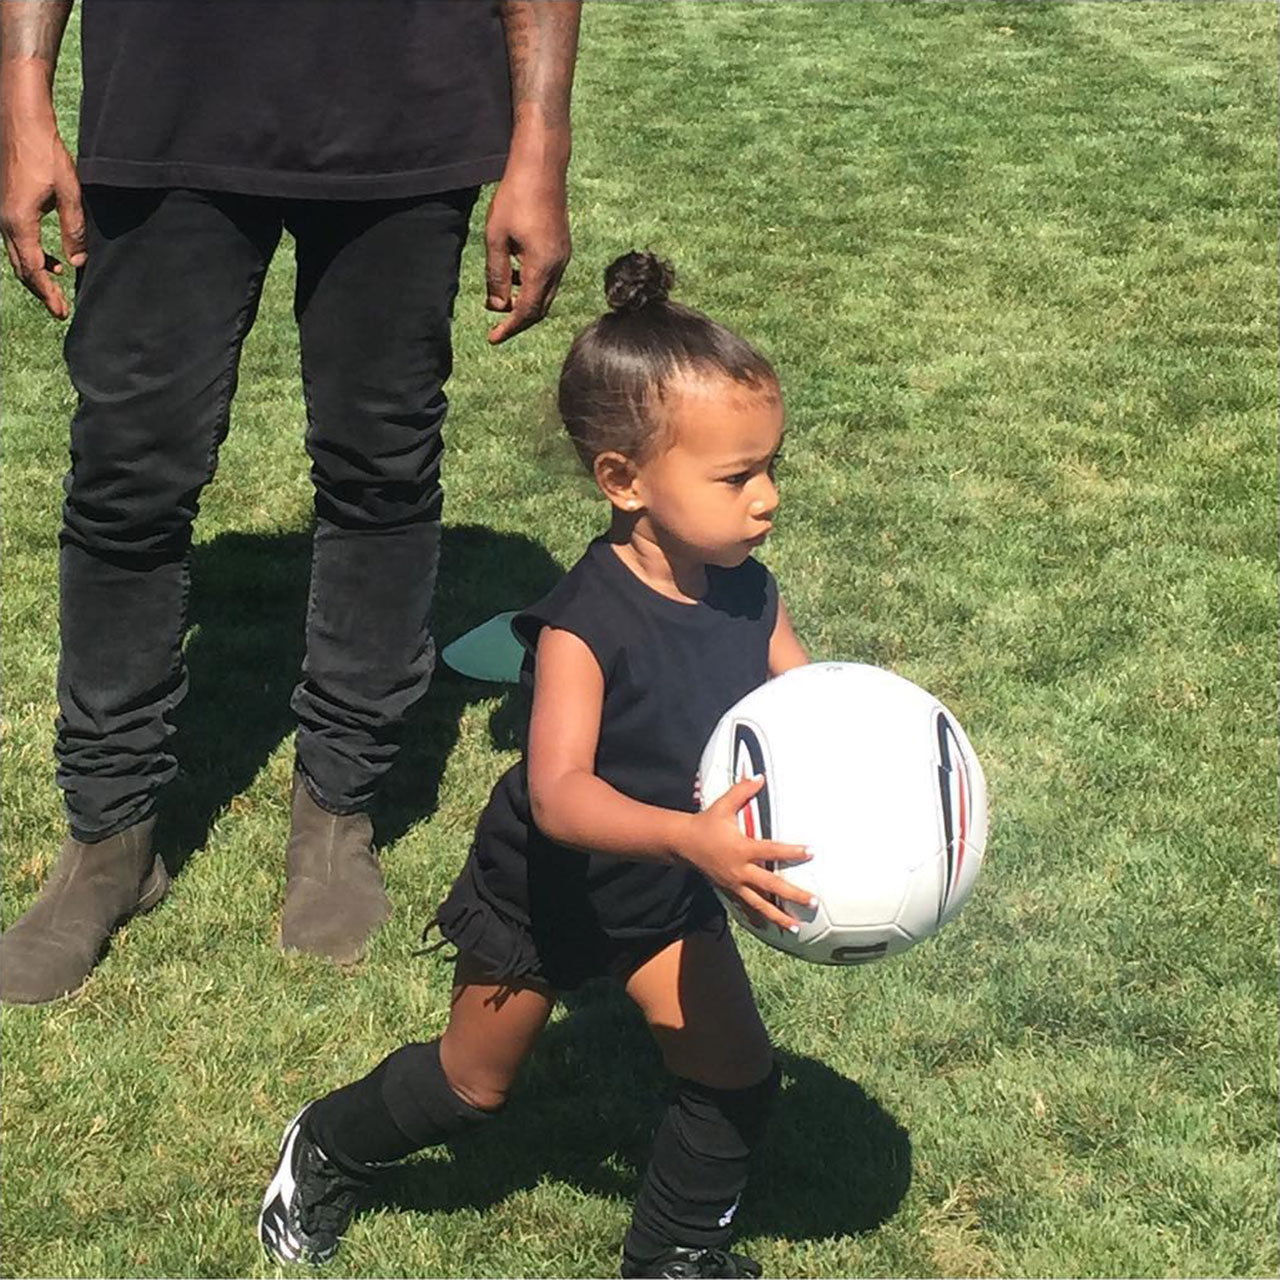 North West plays soccer in front of father Kanye West